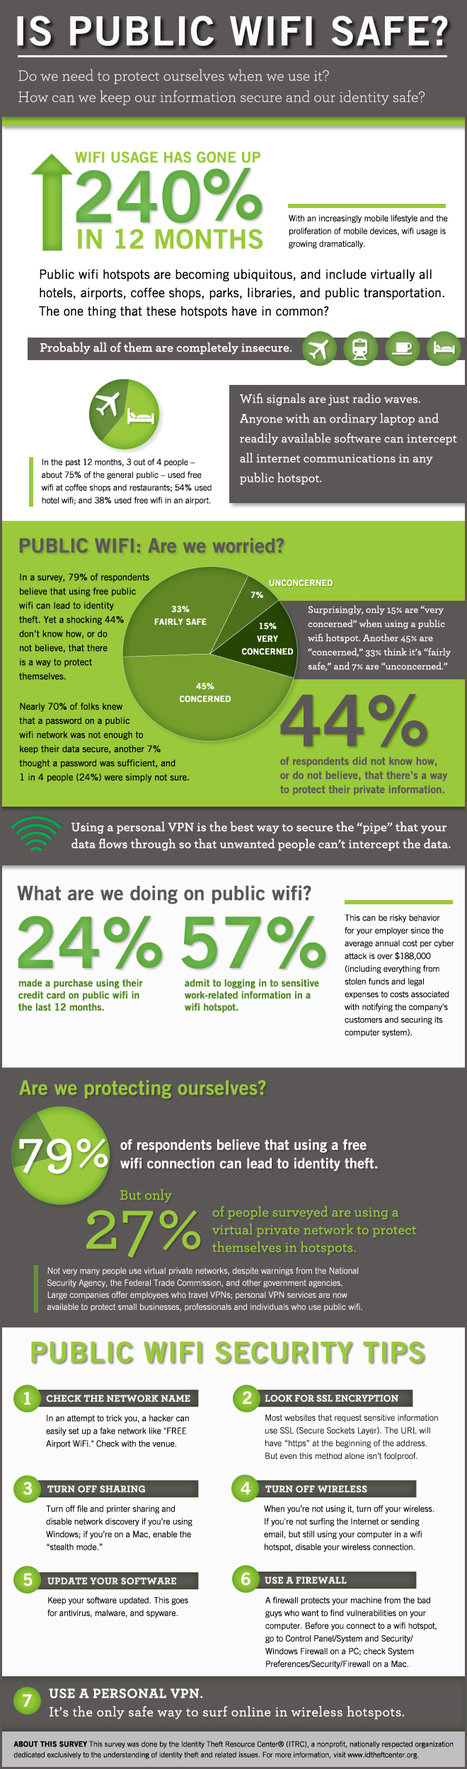 Is Public WiFi Safe? [INFOGRAPHIC] | 21st Century Learning and Teaching | Scoop.it